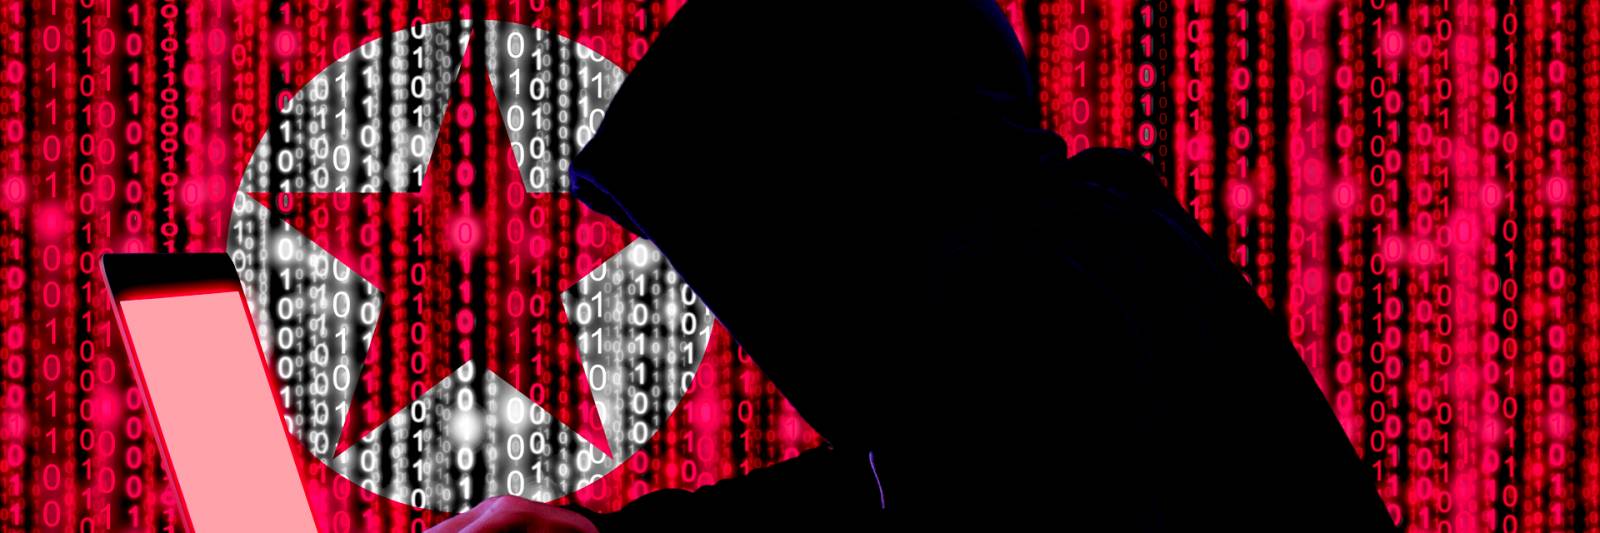 Security Researchers Targeted By North Korean Hackers